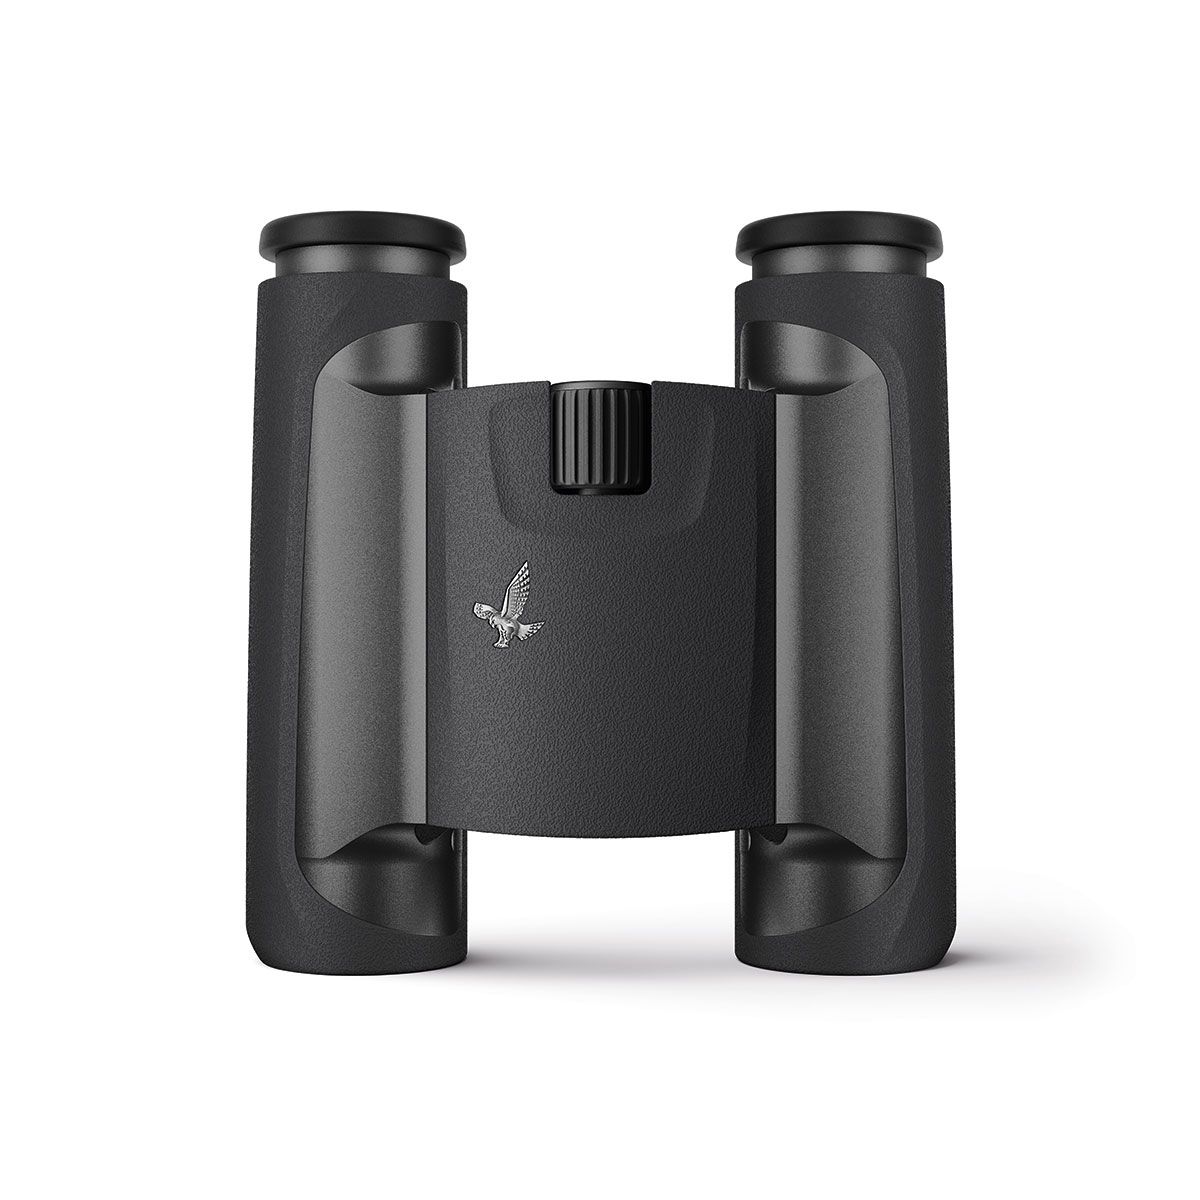 Swarovski CL 8x25 Pocket Binoculars Anthracite with Wild Nature Accessory Pack - High resolution view of the binoculars